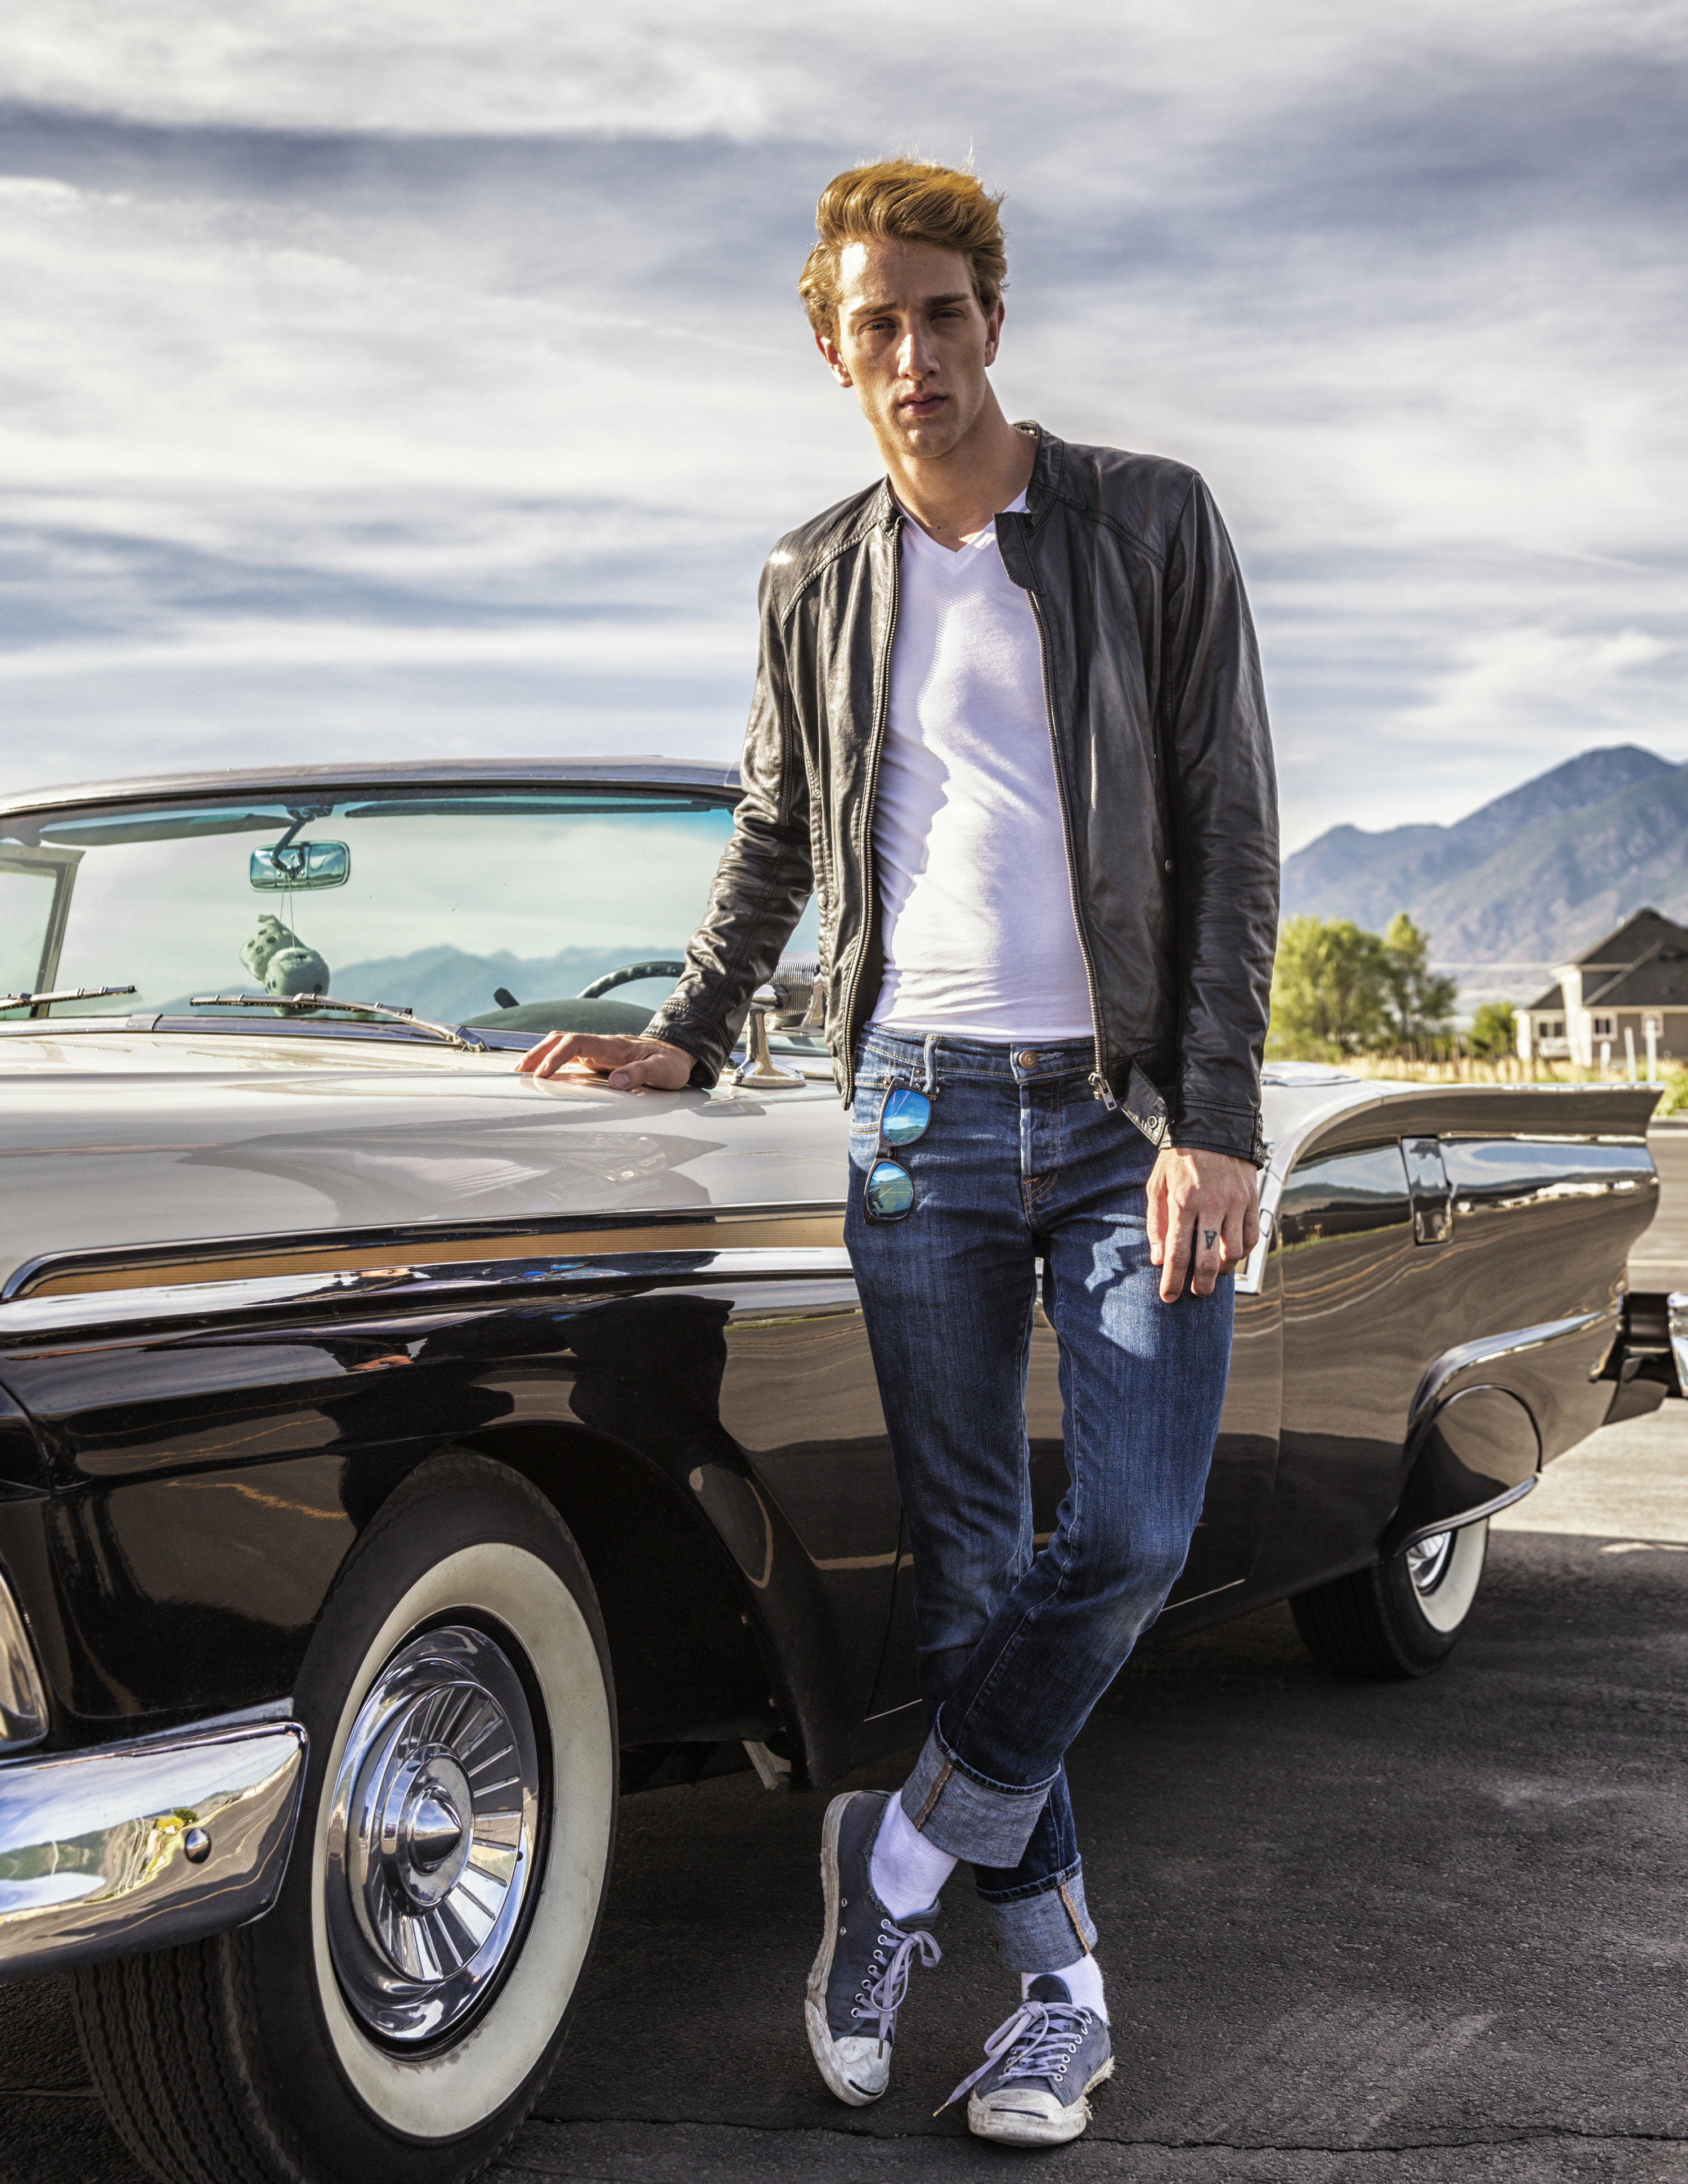 A man in a leather jacket poses next to a convertible